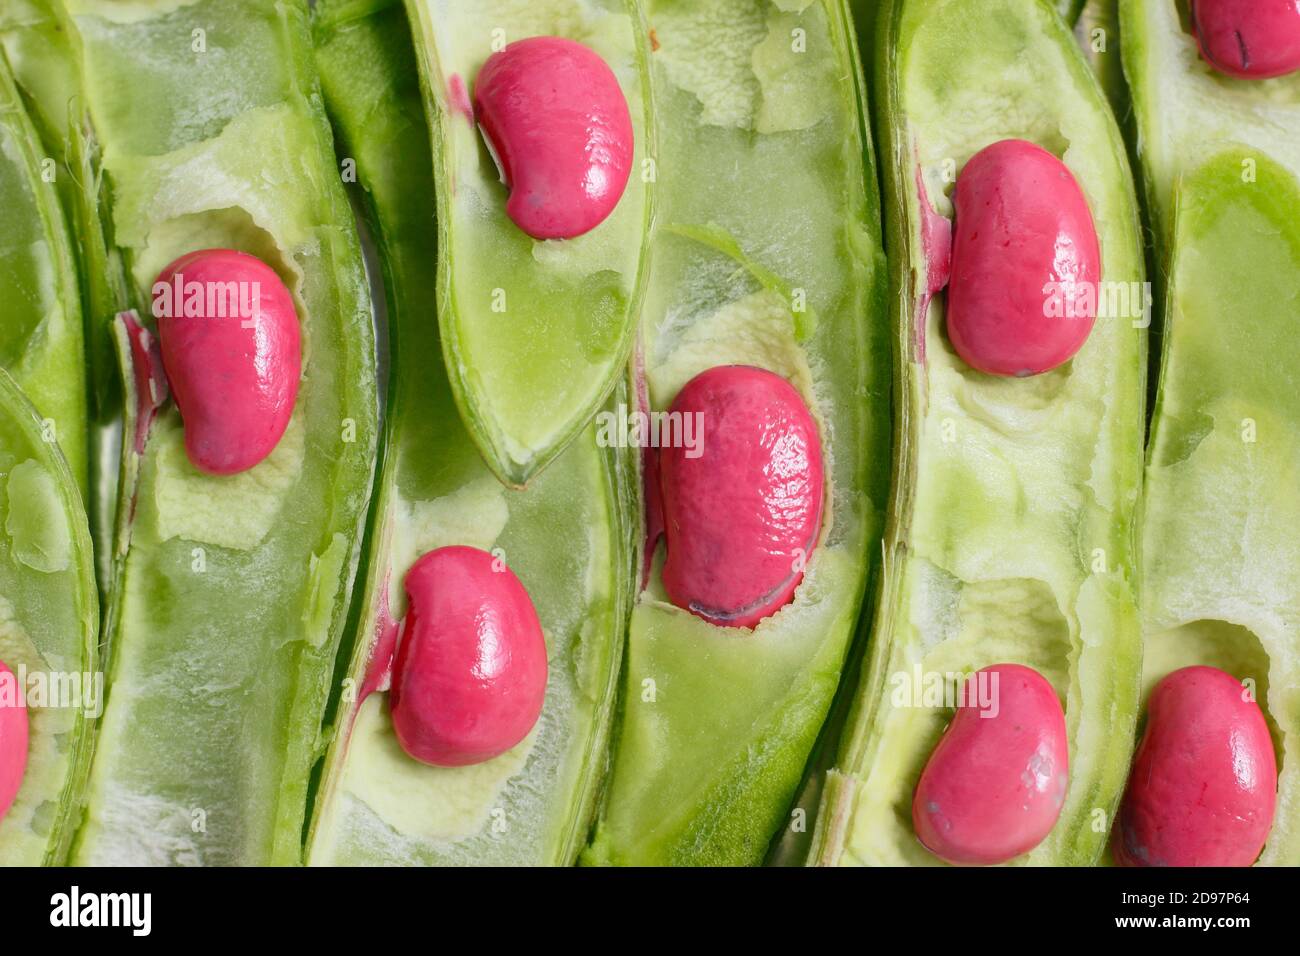 Phaseolus coccineus. Runner bean pods sliced open to reveal seeds. Stock Photo